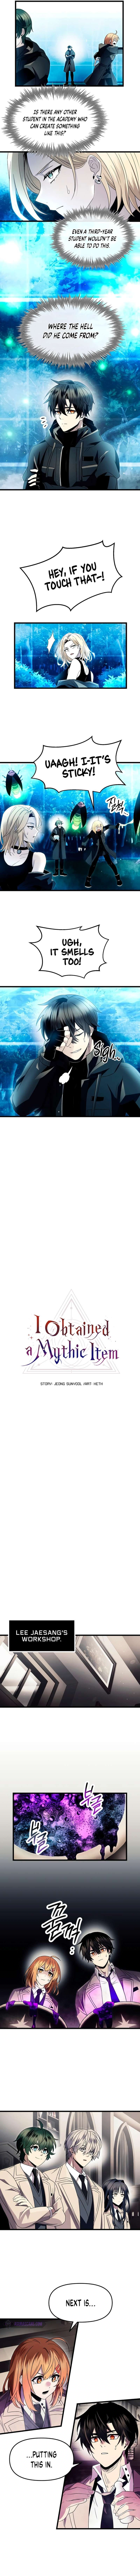 I Obtained a Mythic Item Chapter 68 page 3